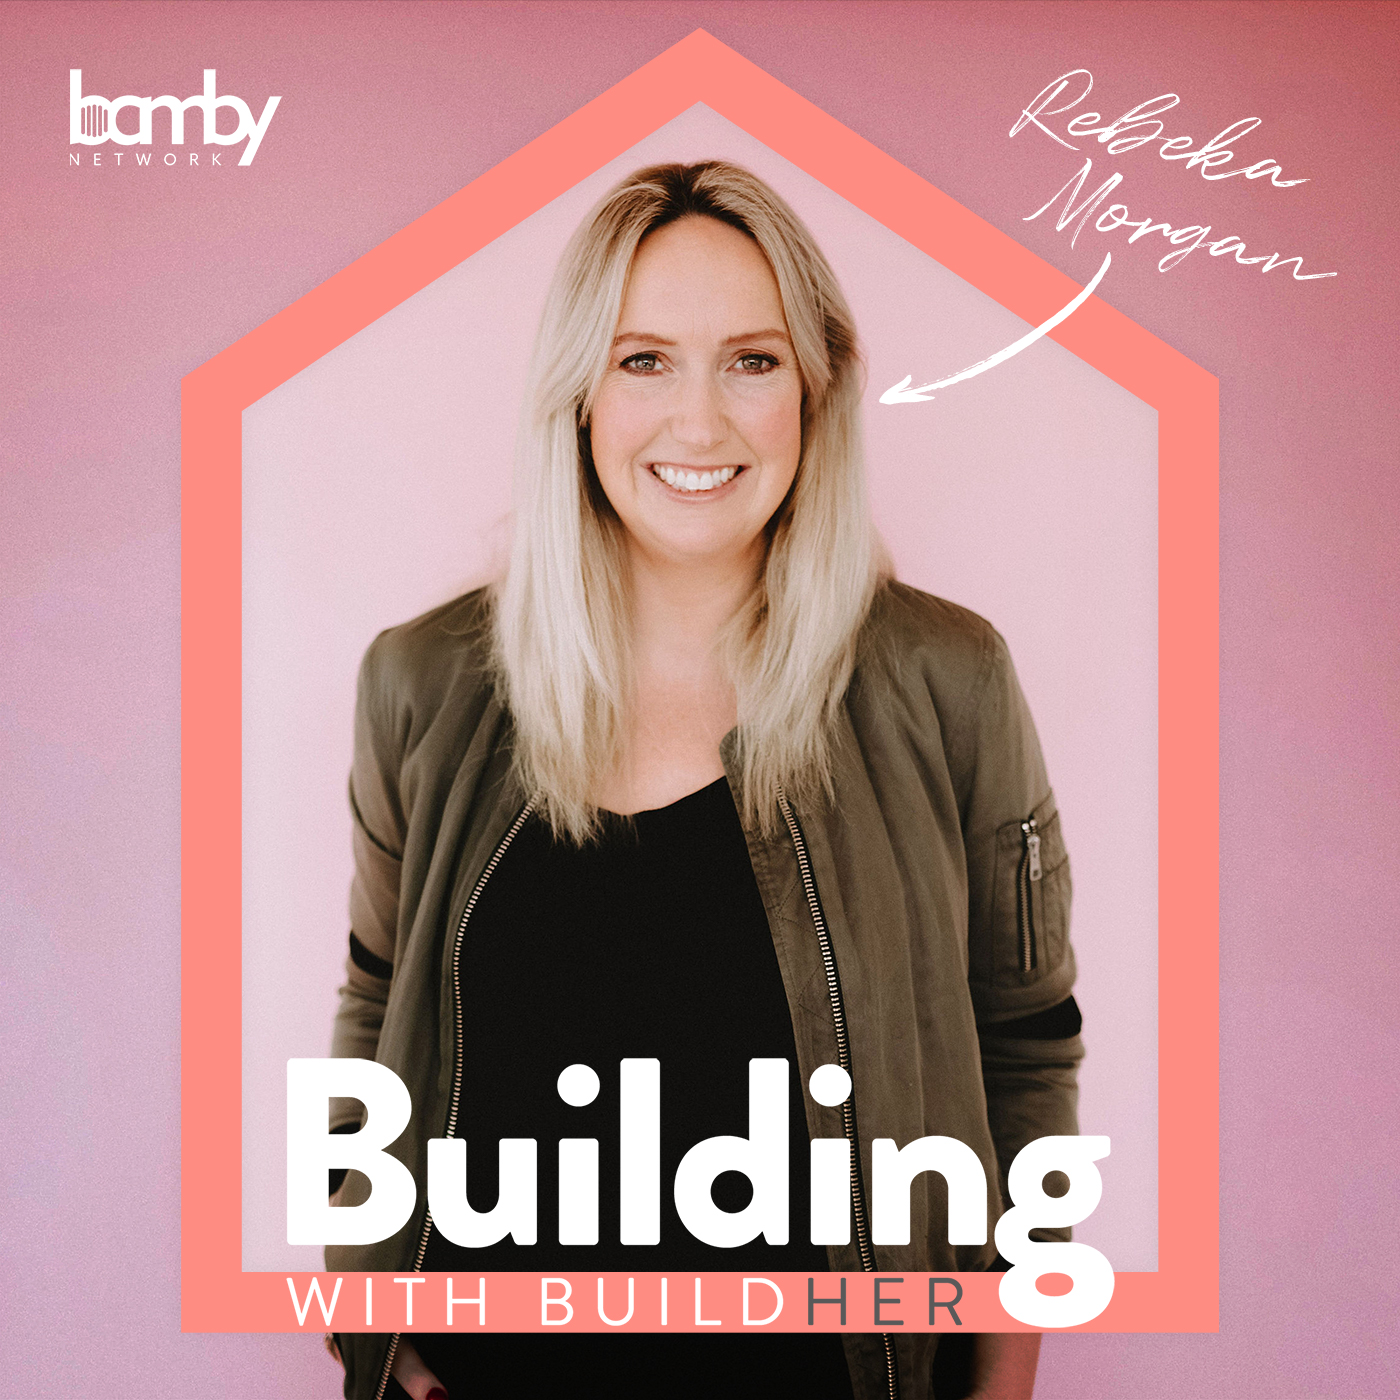 Candice has the Building Bug - A BuildHer Story